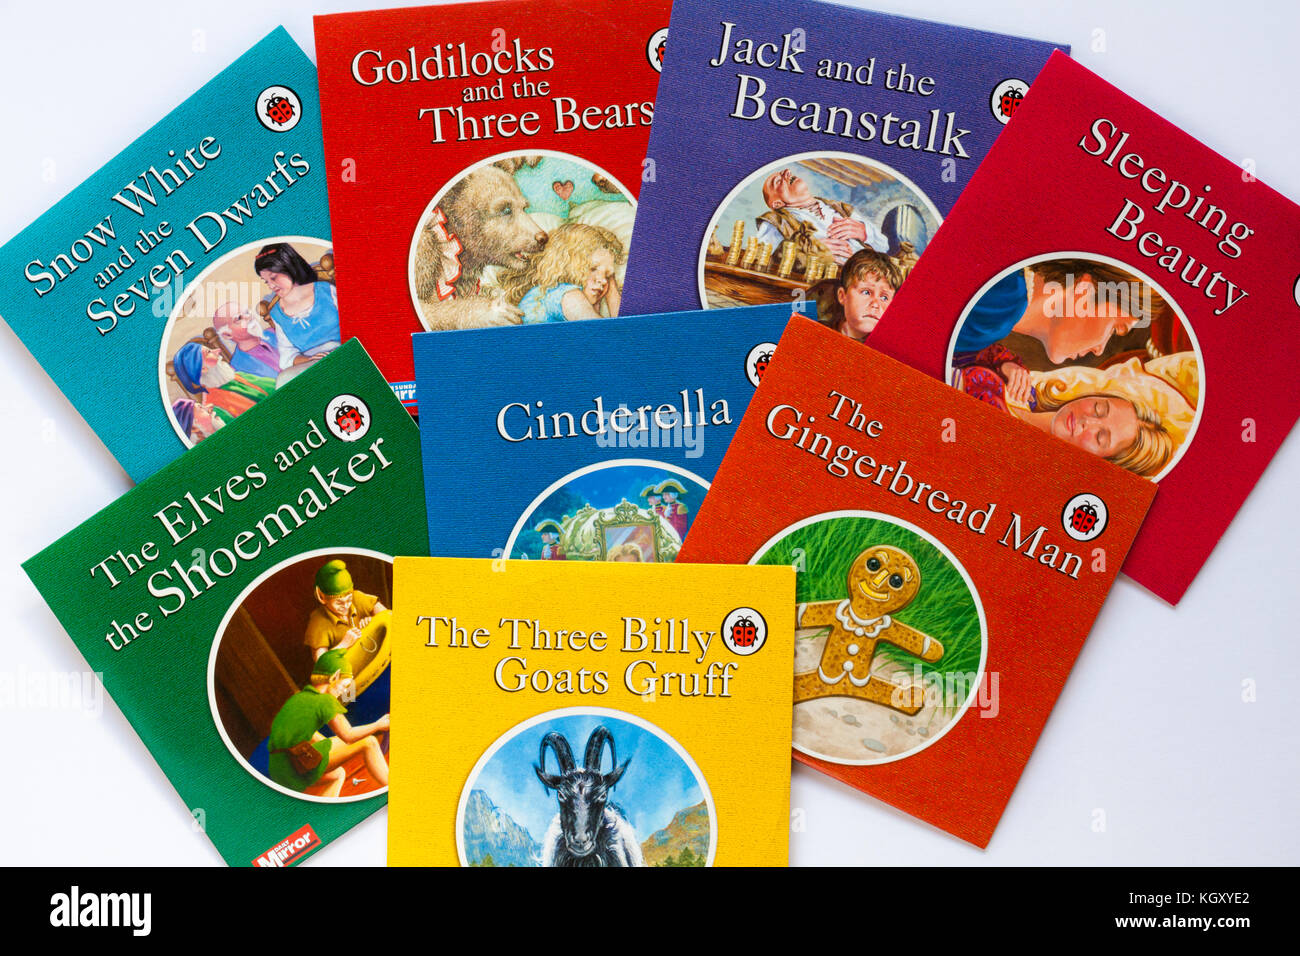 Selection of Ladybird children's DVDs set on white background Stock Photo